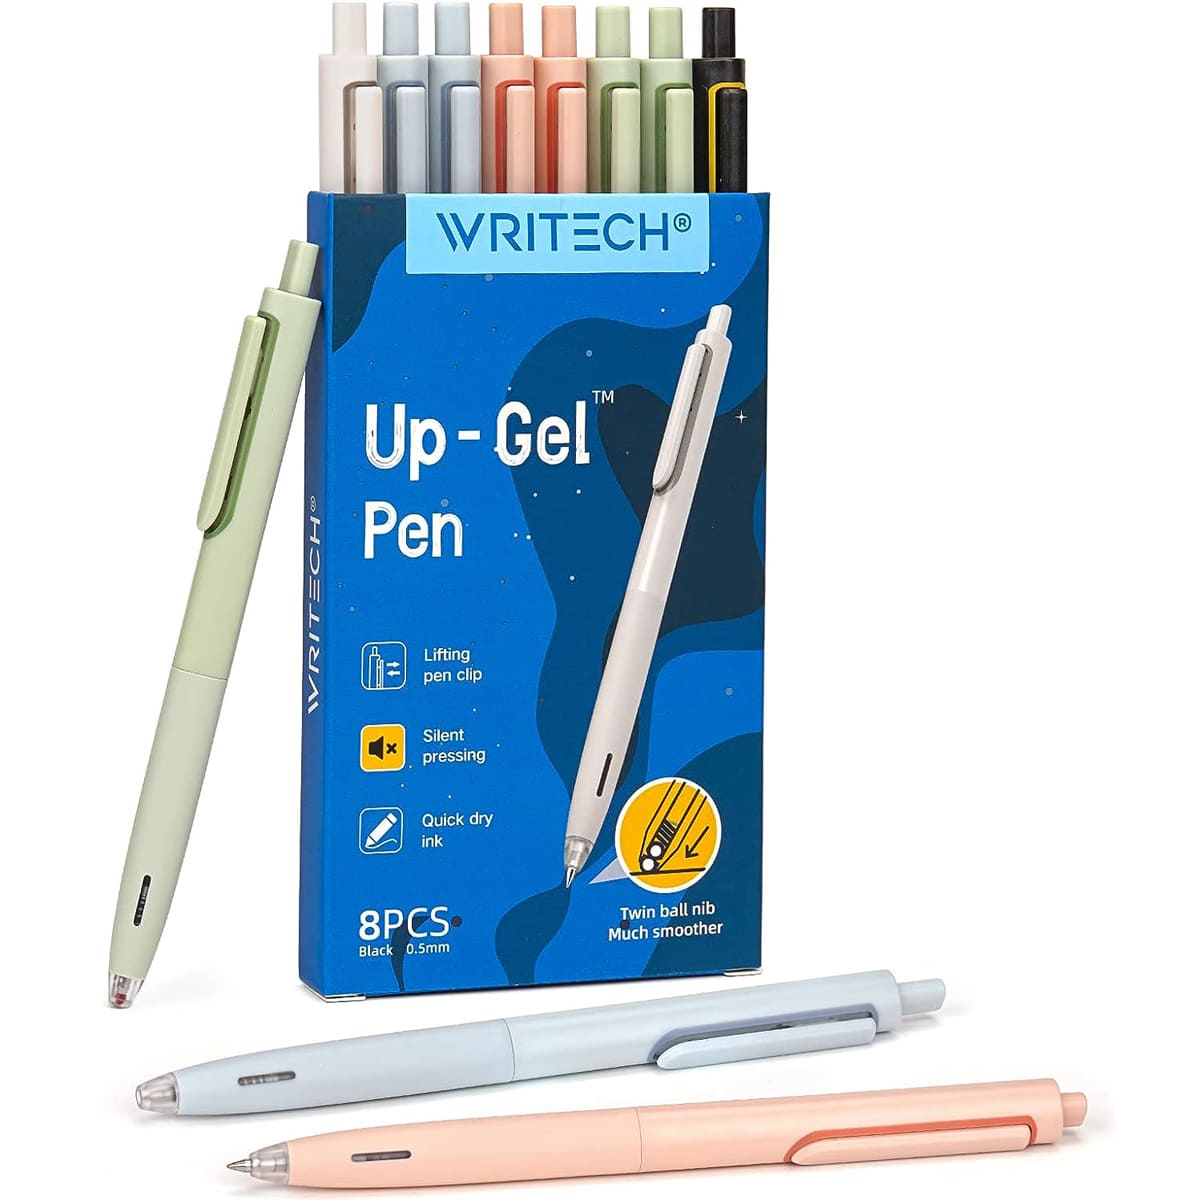 6 Pack Bright Rollerball Gel Pens by Writech